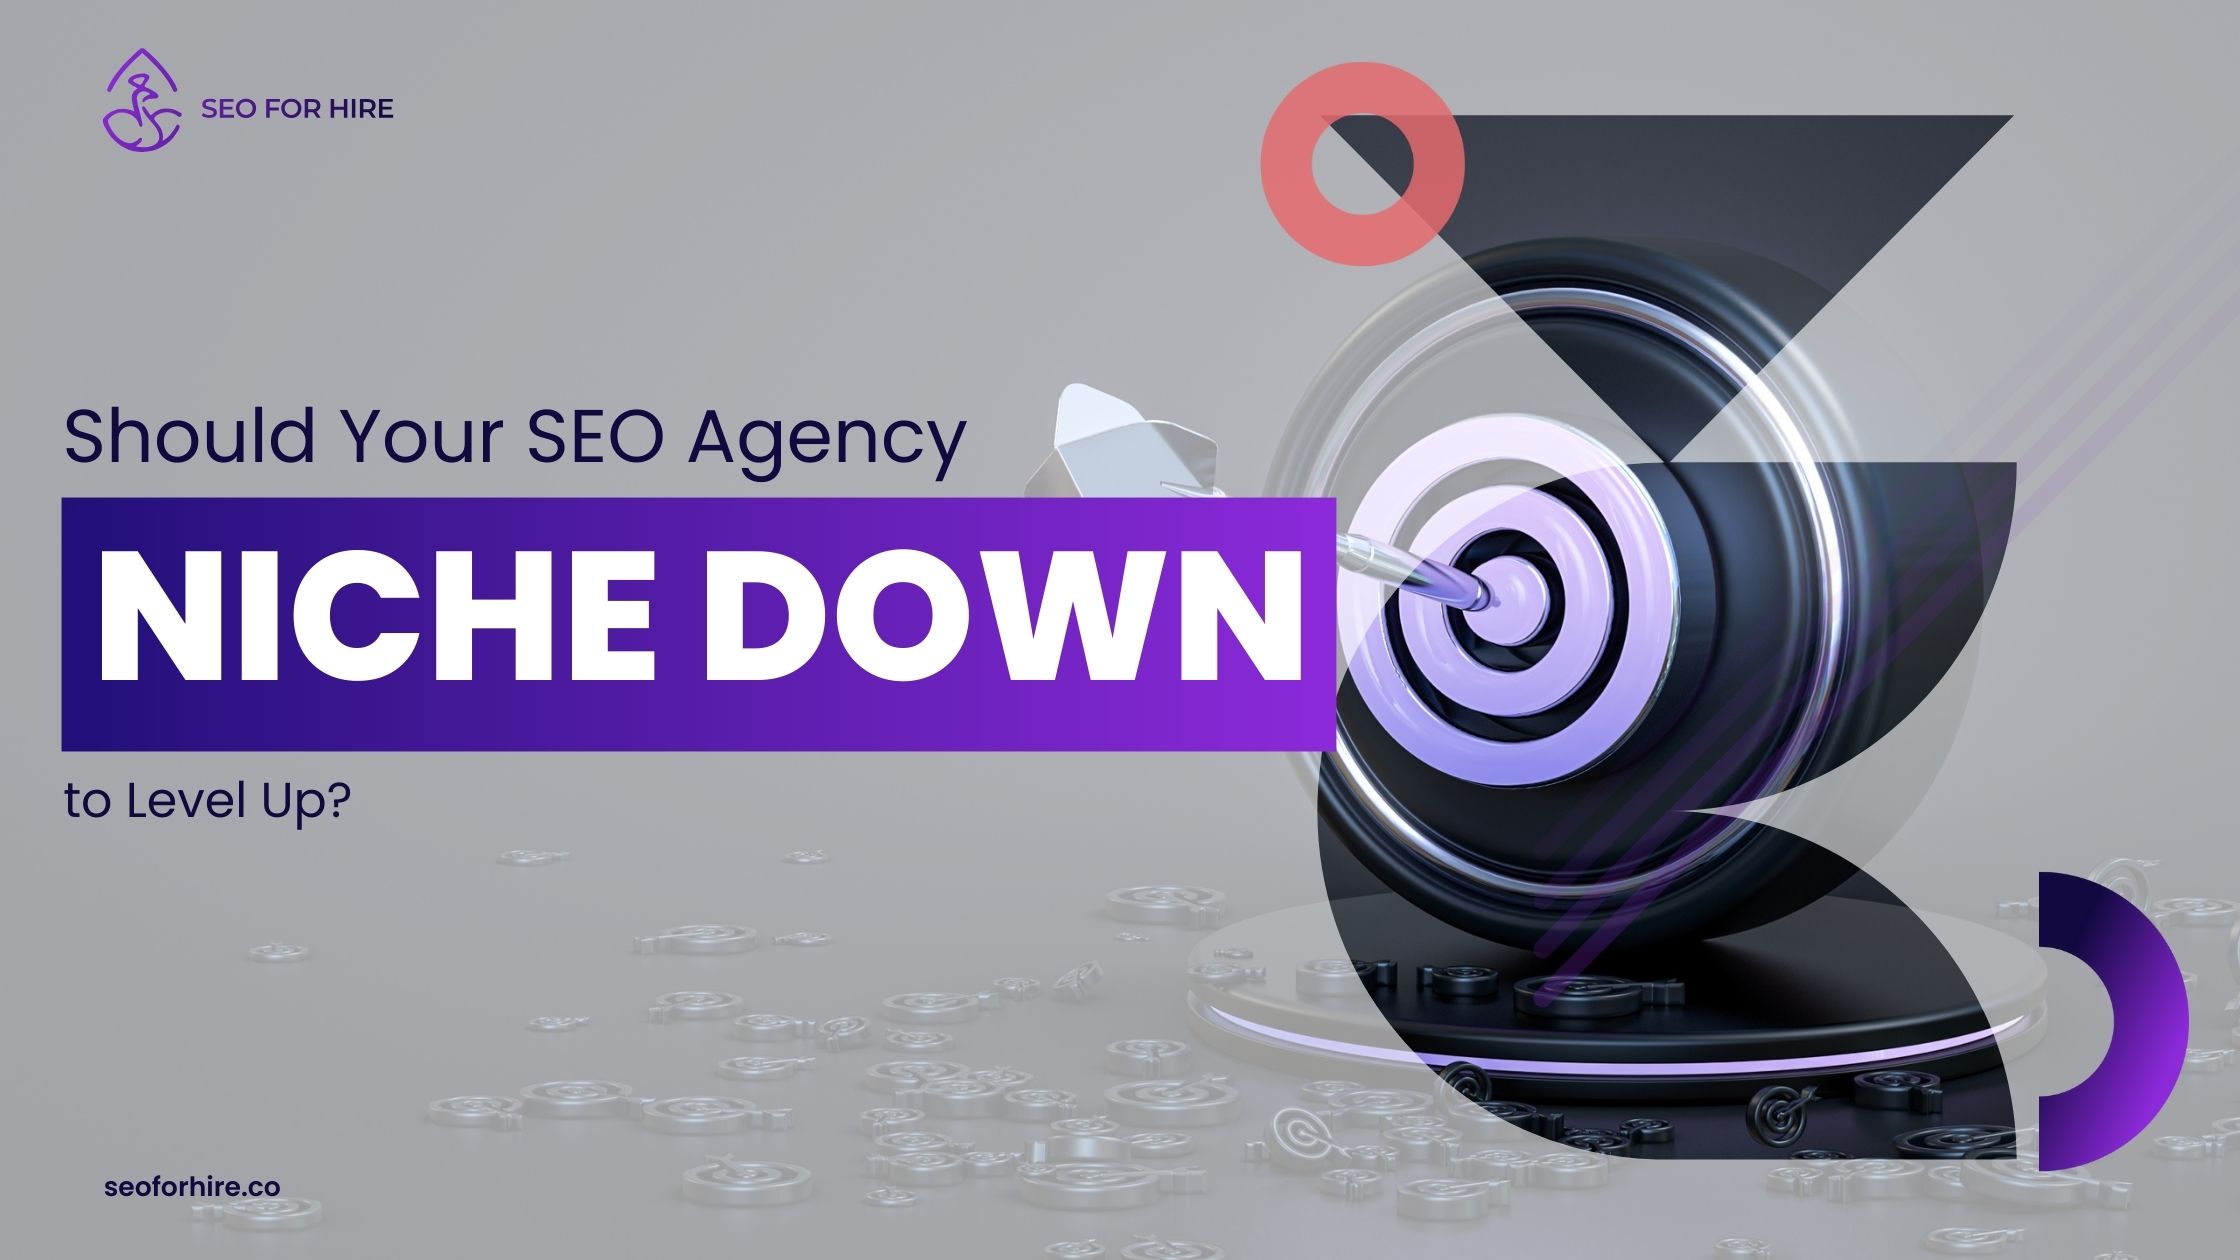 Productising your SEO Agency and choosing SEO niches